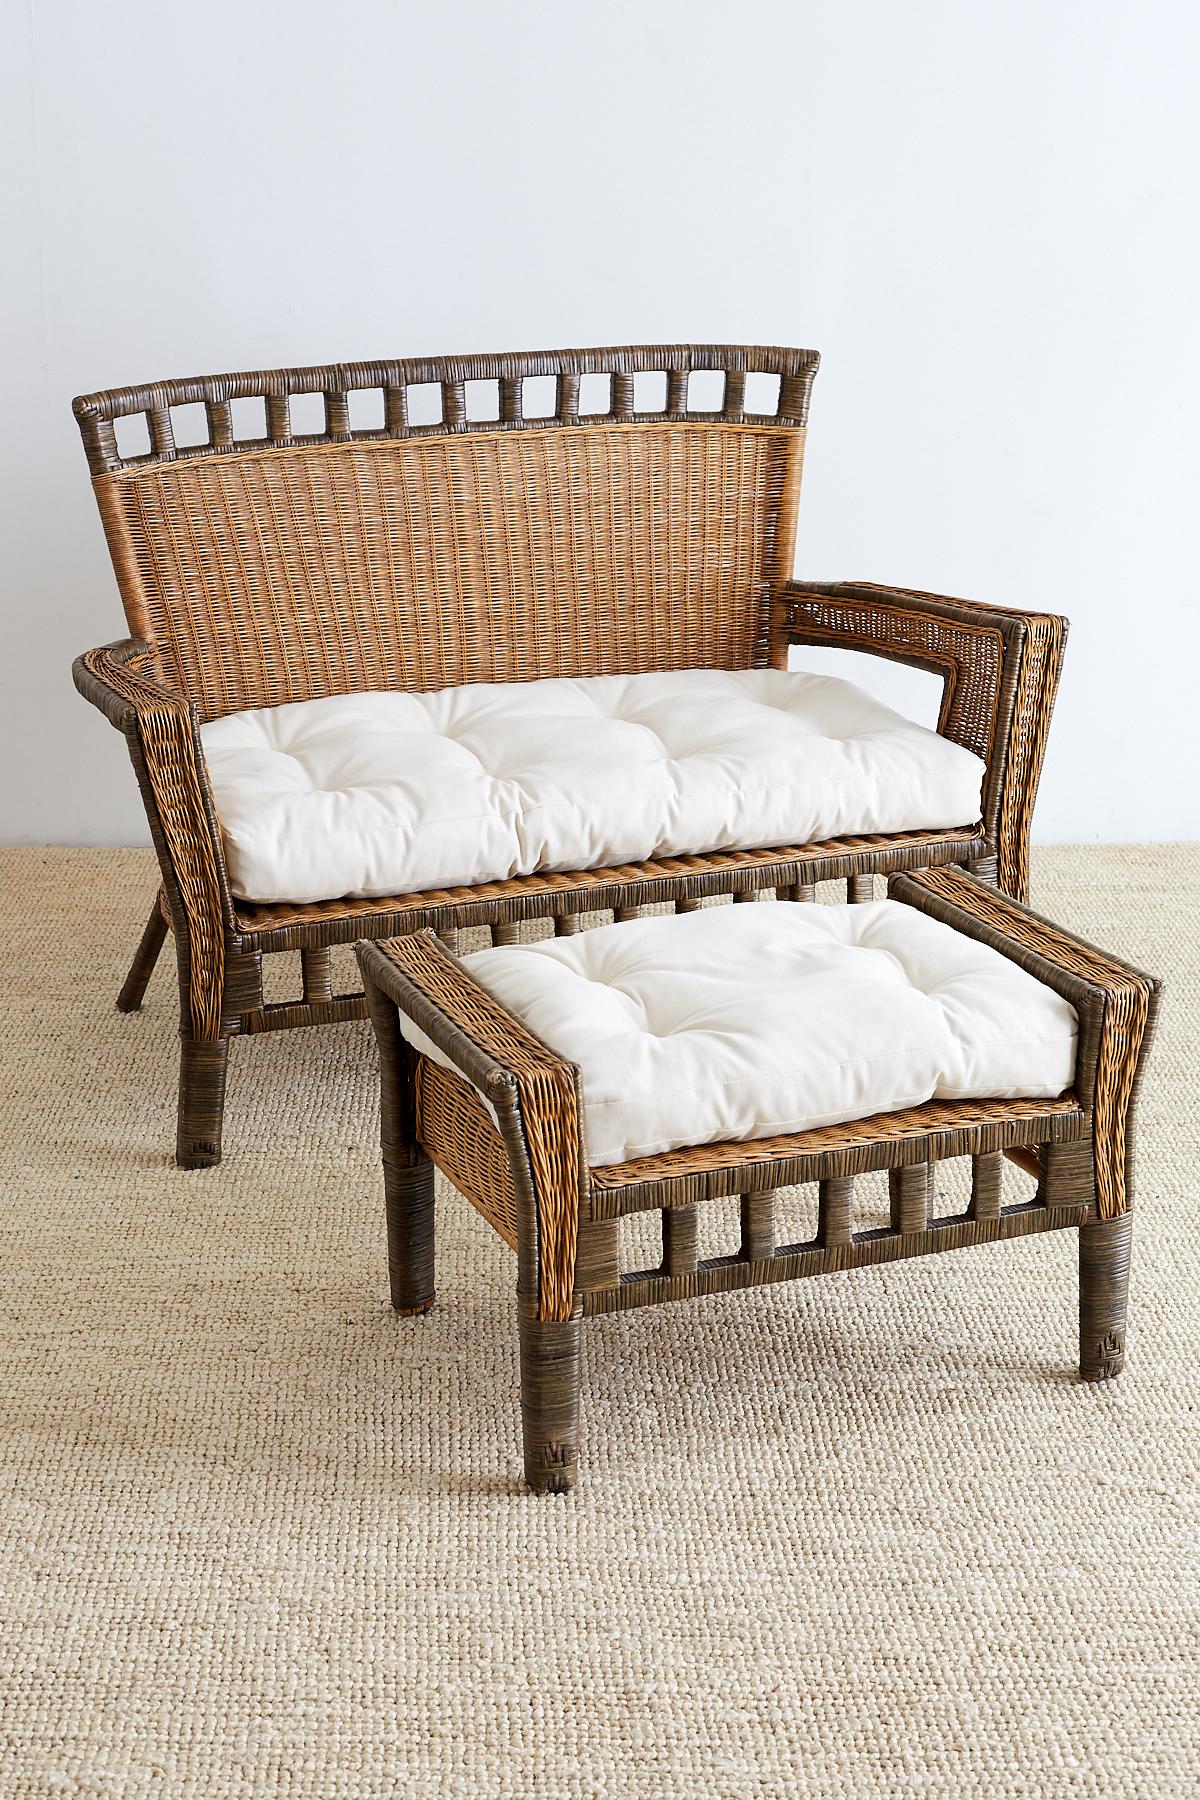 Handsome French Art Deco style rattan and wicker settee with ottoman. Features a square back rattan frame covered with wicker. The back and apron have a geometric square design and the frame has a contrasting green accent of rattan strapping. The